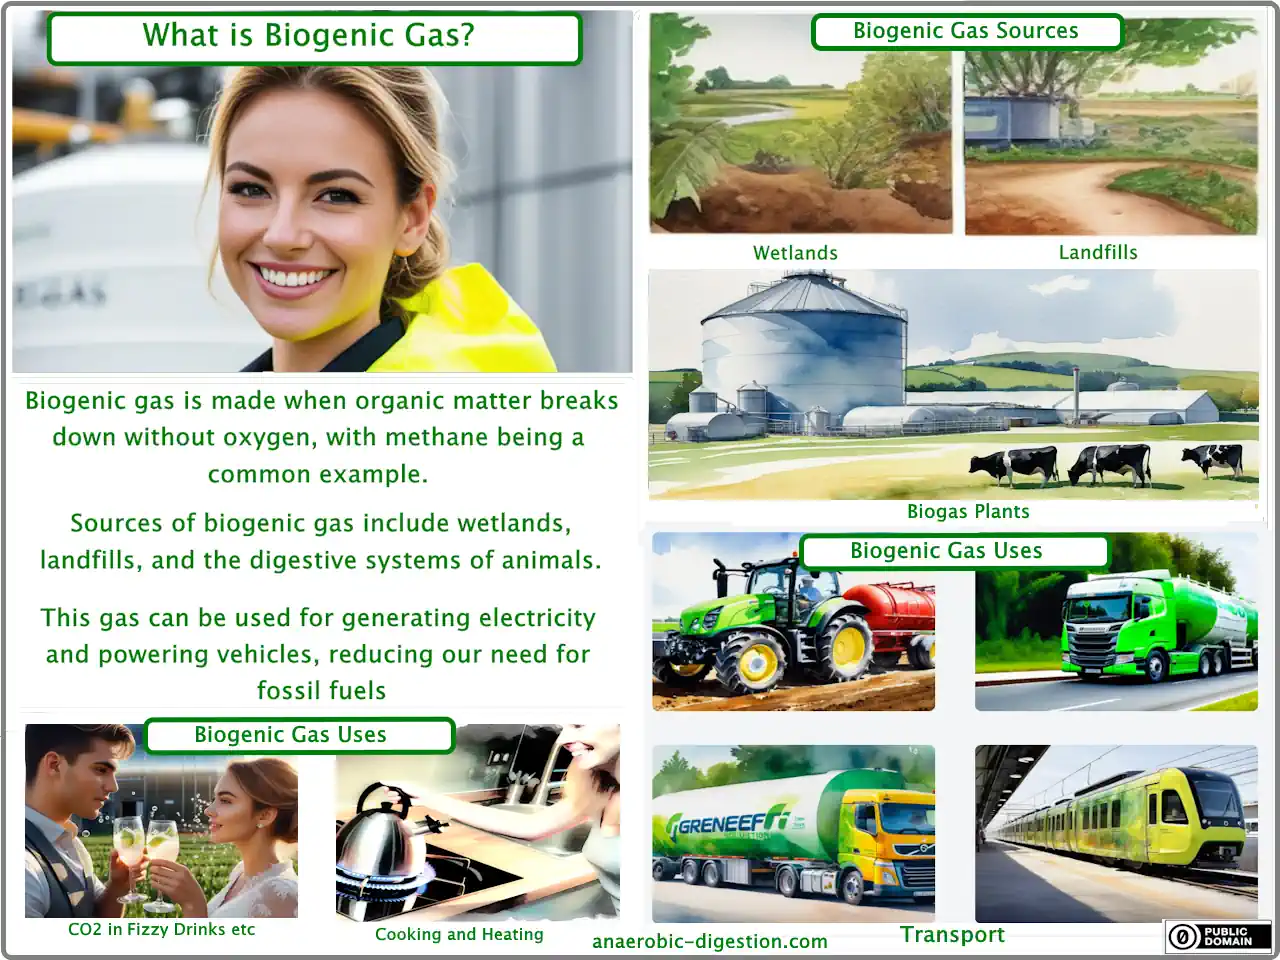 What Is Biogenic Gas? Infographic image explains the meaning of the term: biogenic gas.